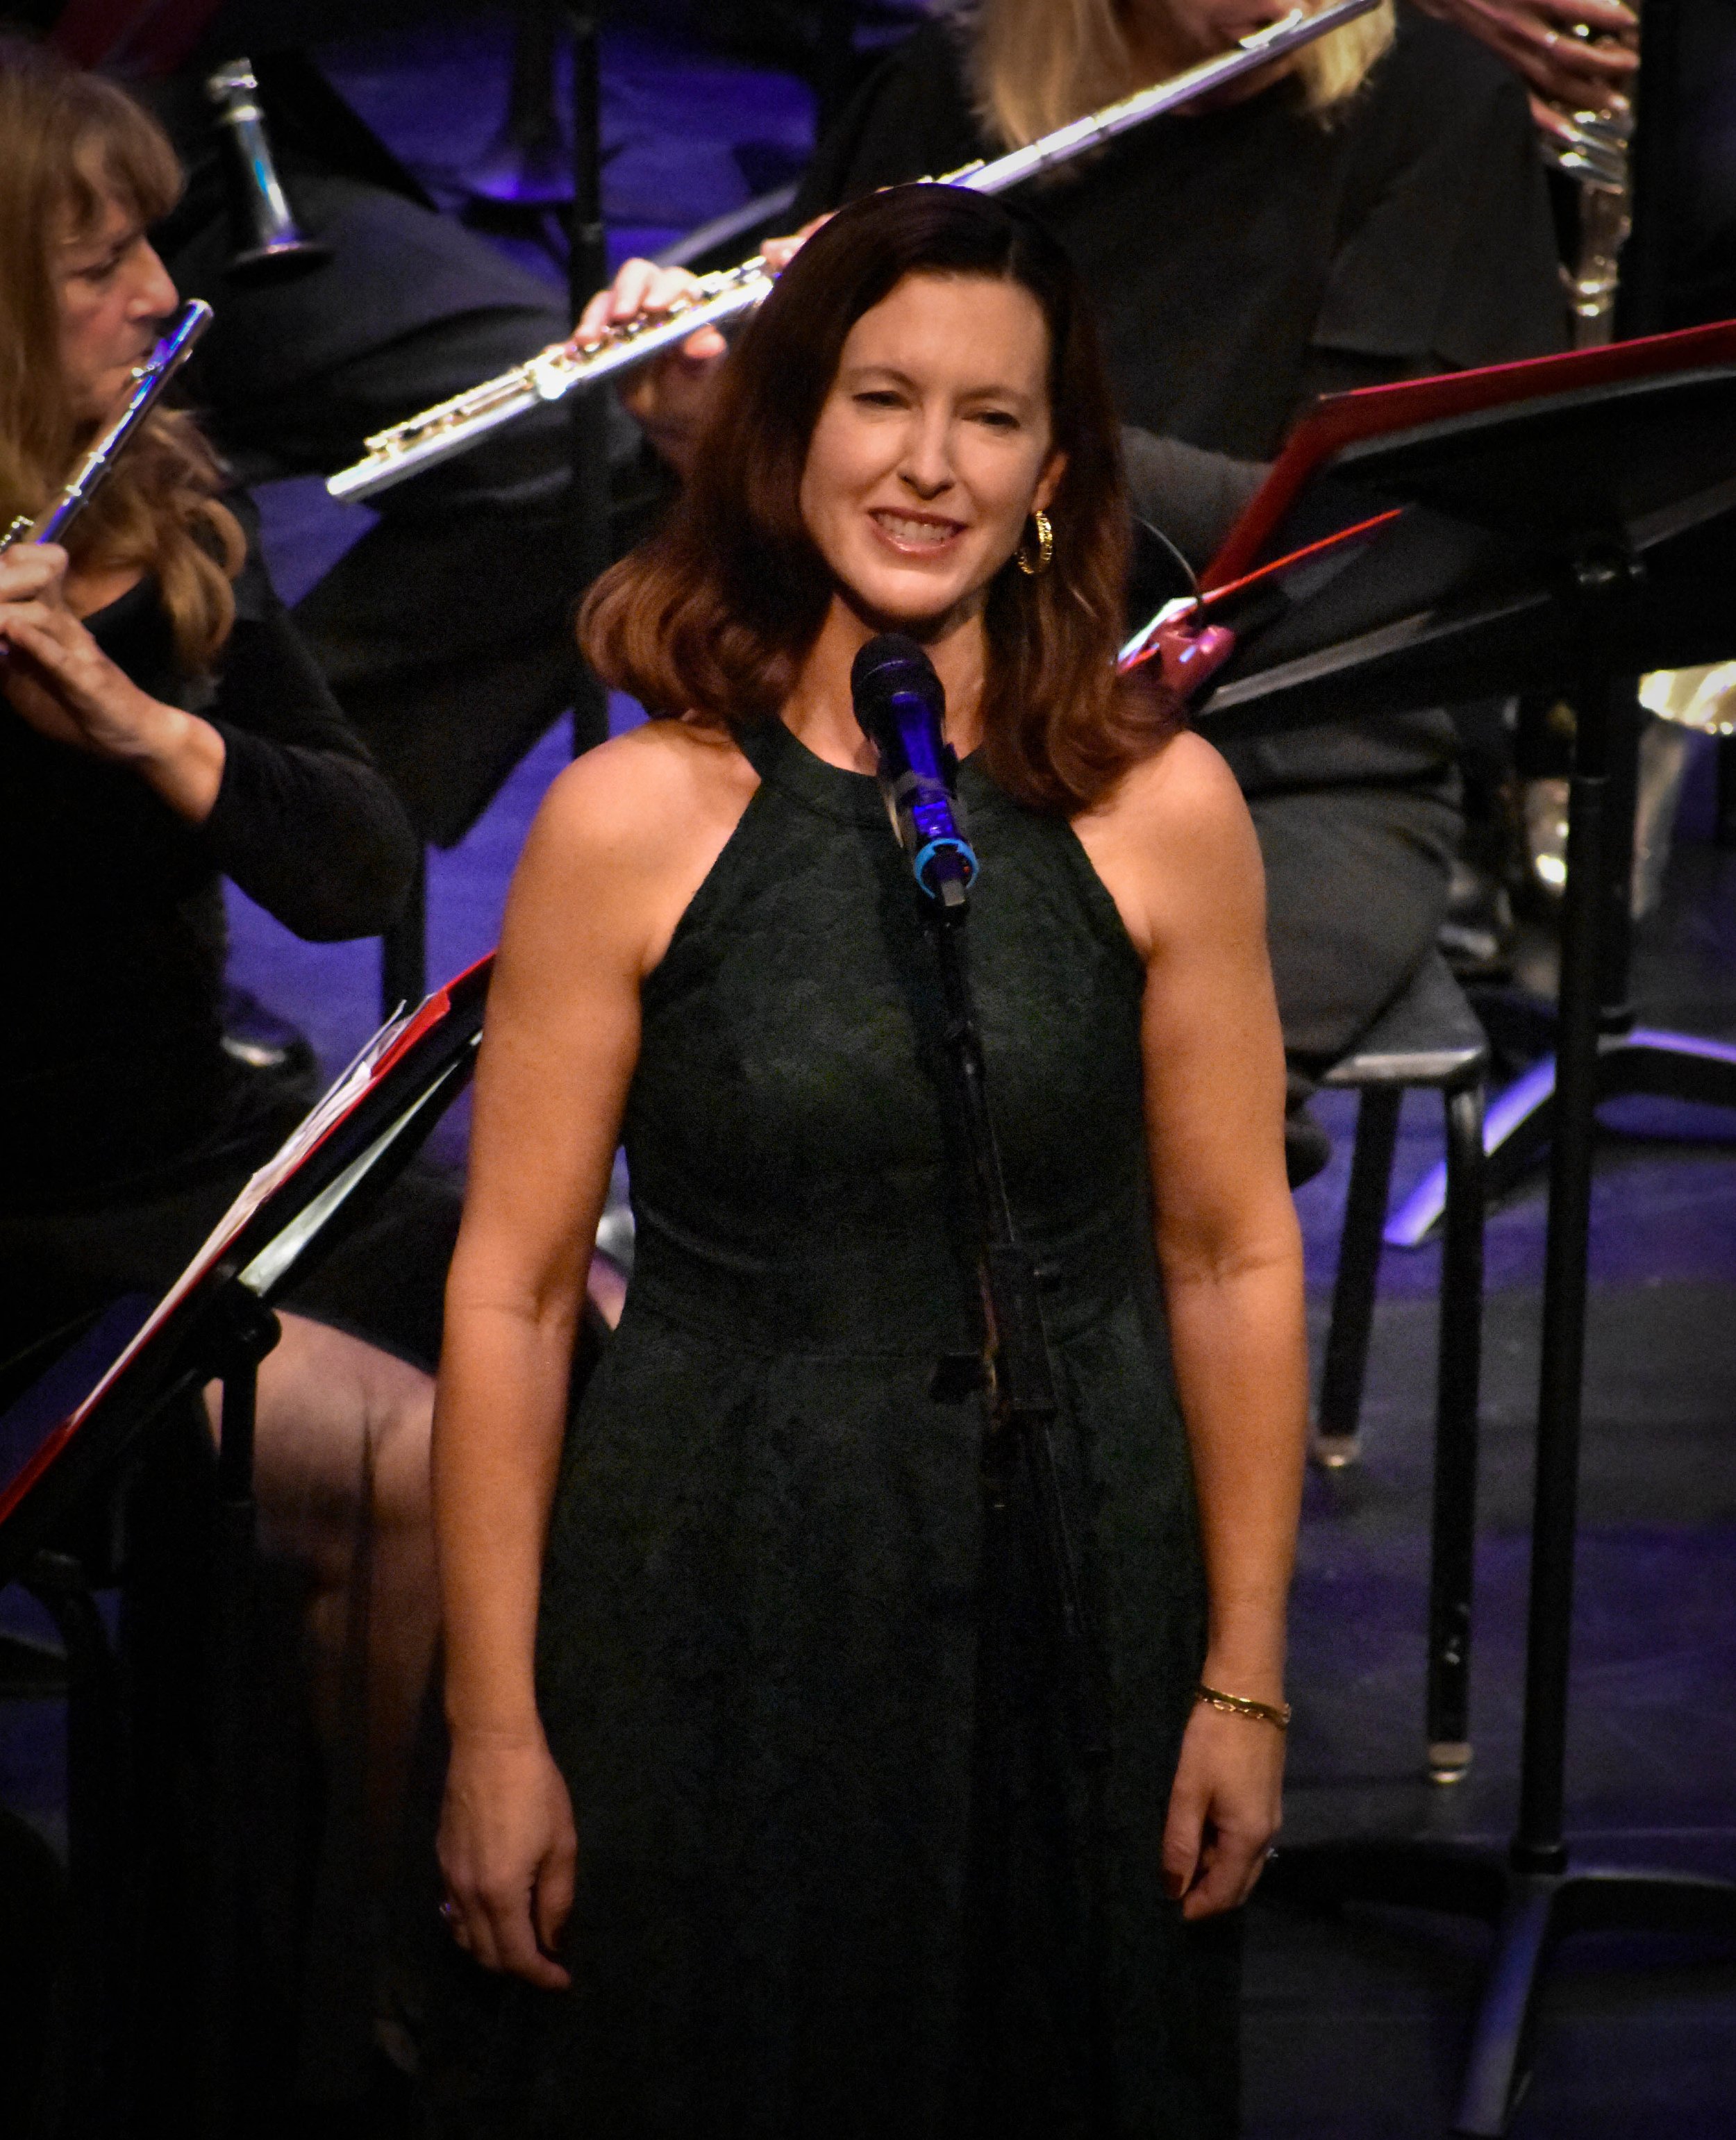 12-19-2021 LCB Holiday Concert by Peyton Webster18-10.jpg